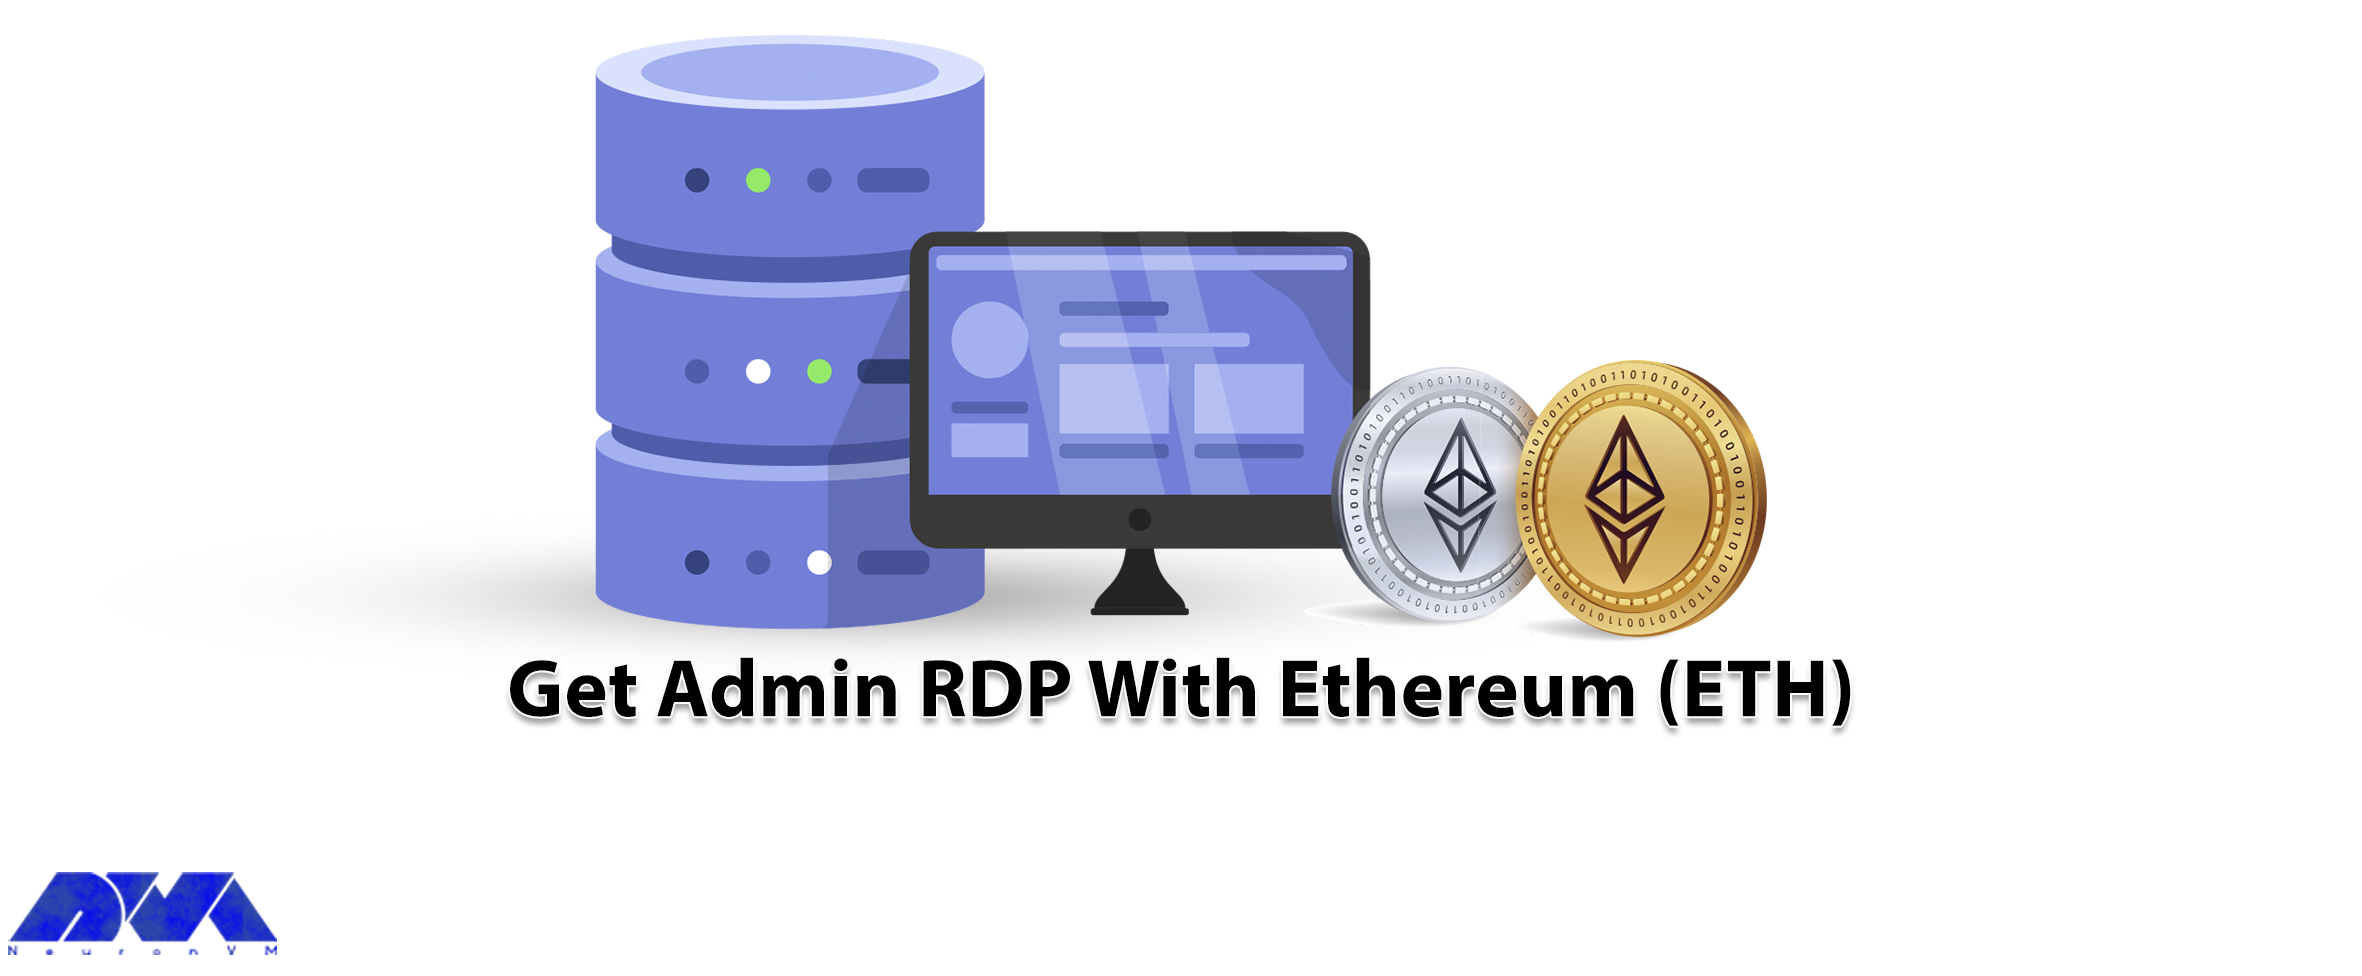 Get Admin RDP With Ethereum (ETH)